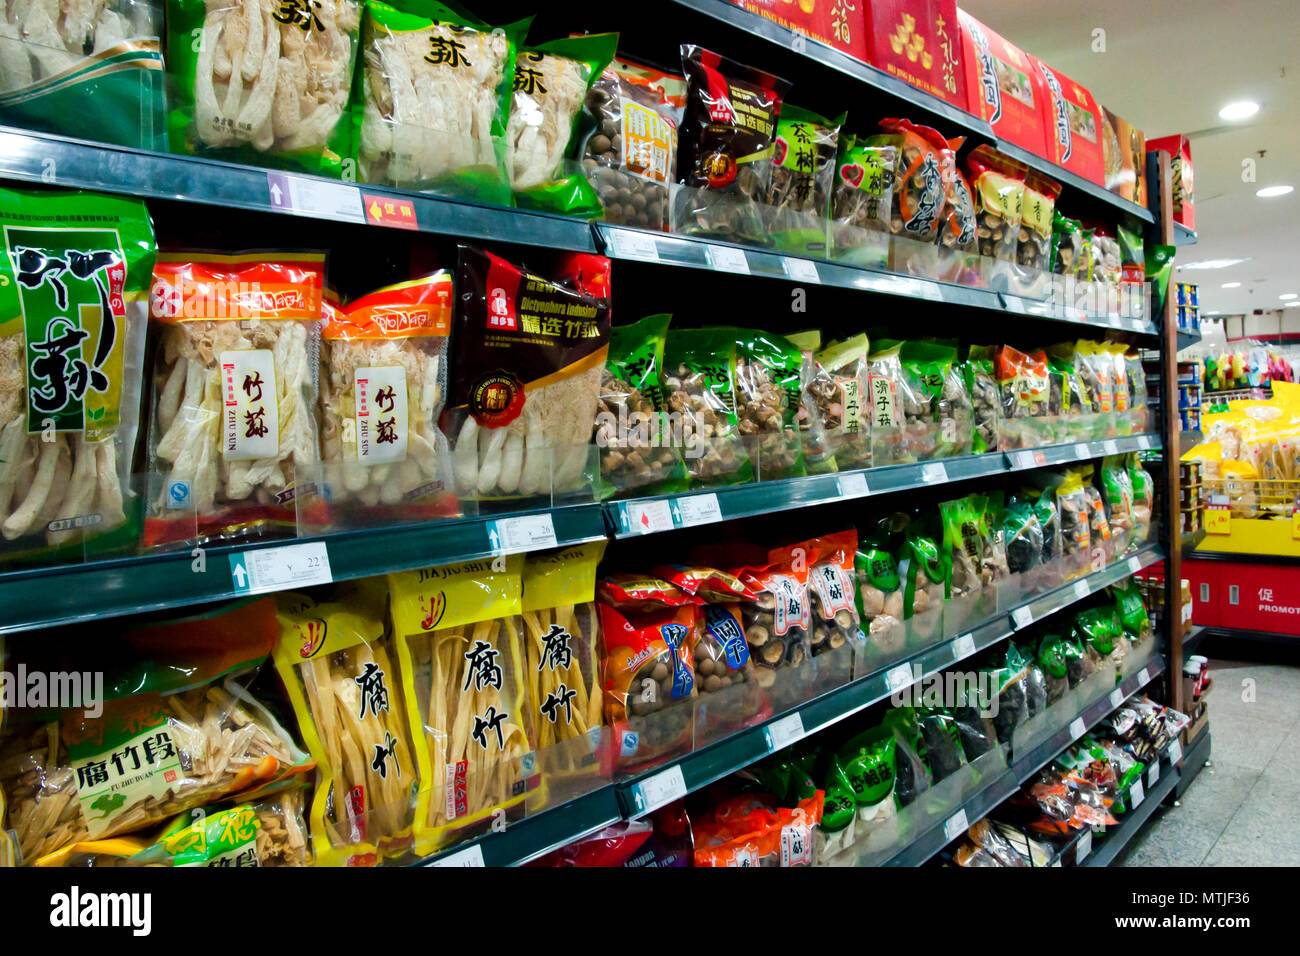 BEIJING, CHINA - May 8, 2012: Local food products in a supermarket Stock Photo